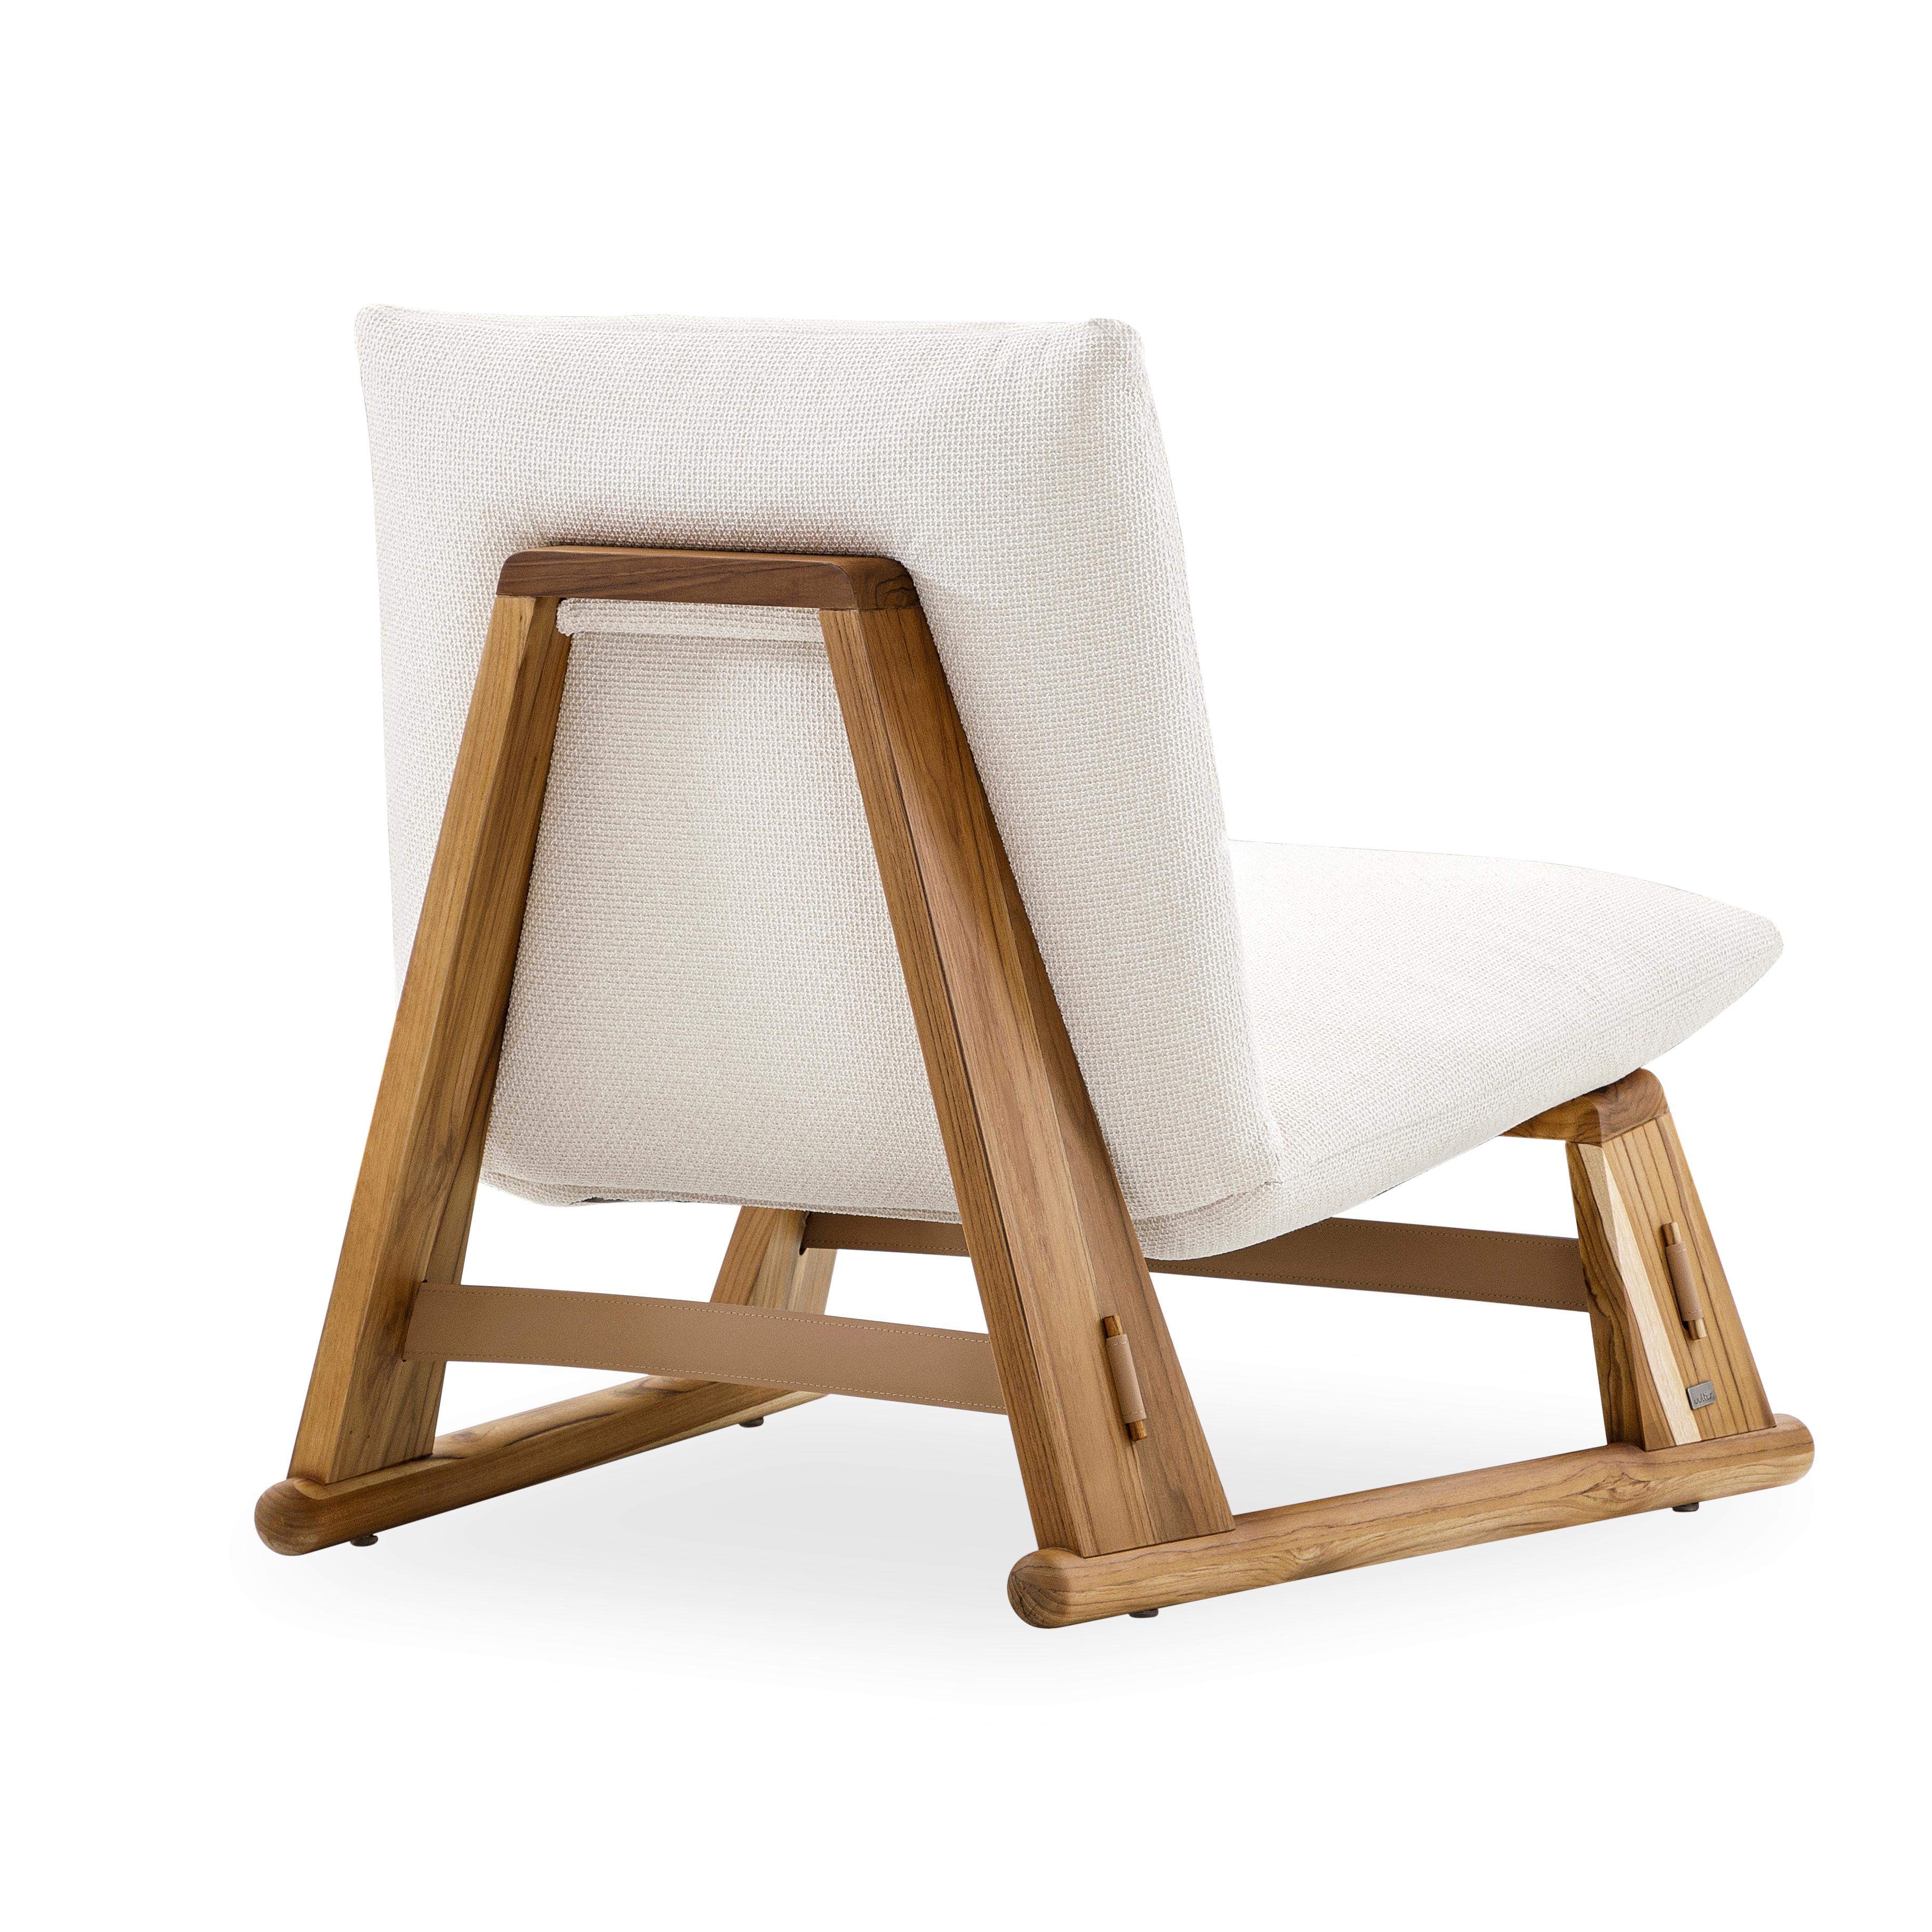 Contemporary Maia Chair in Teak Wood Finish and White Fabric In New Condition For Sale In Miami, FL